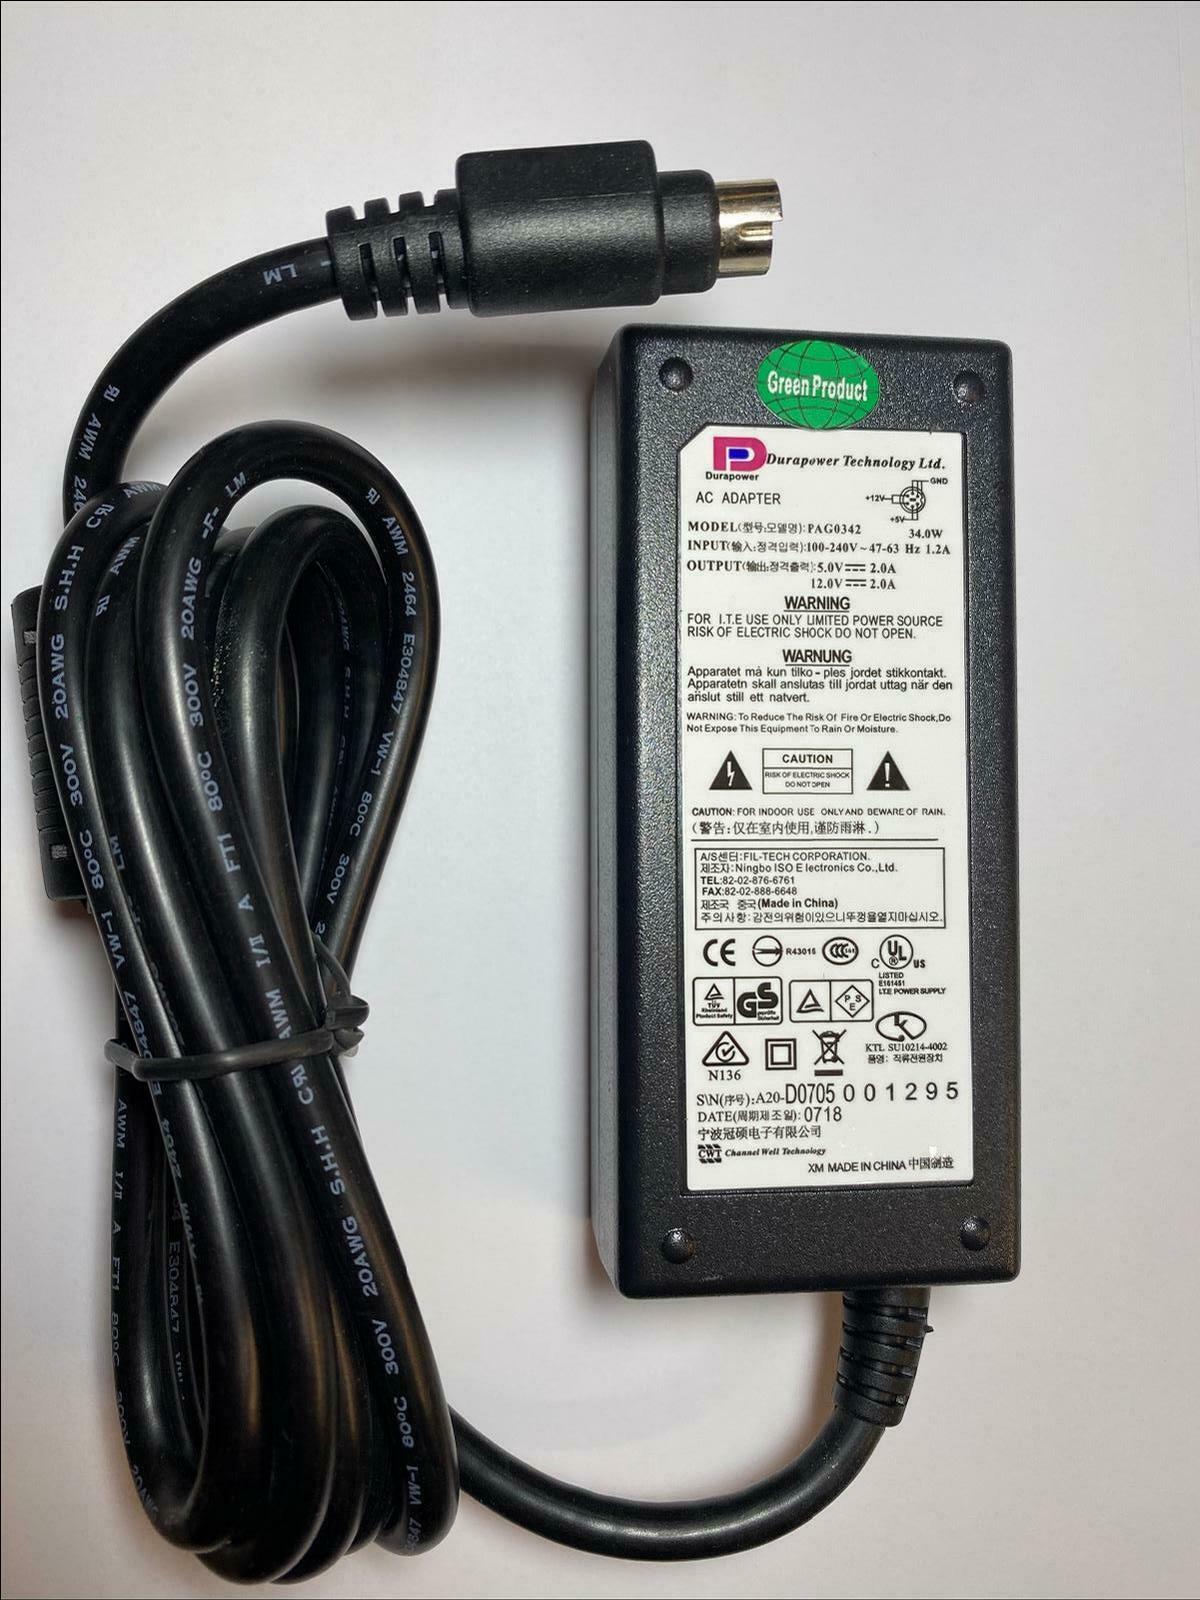 Replacement SPP34-12.0/5.0-2000 Power Supply 6 Pin for External Hard Drives Type: Power Adapter Manufacturer Warranty